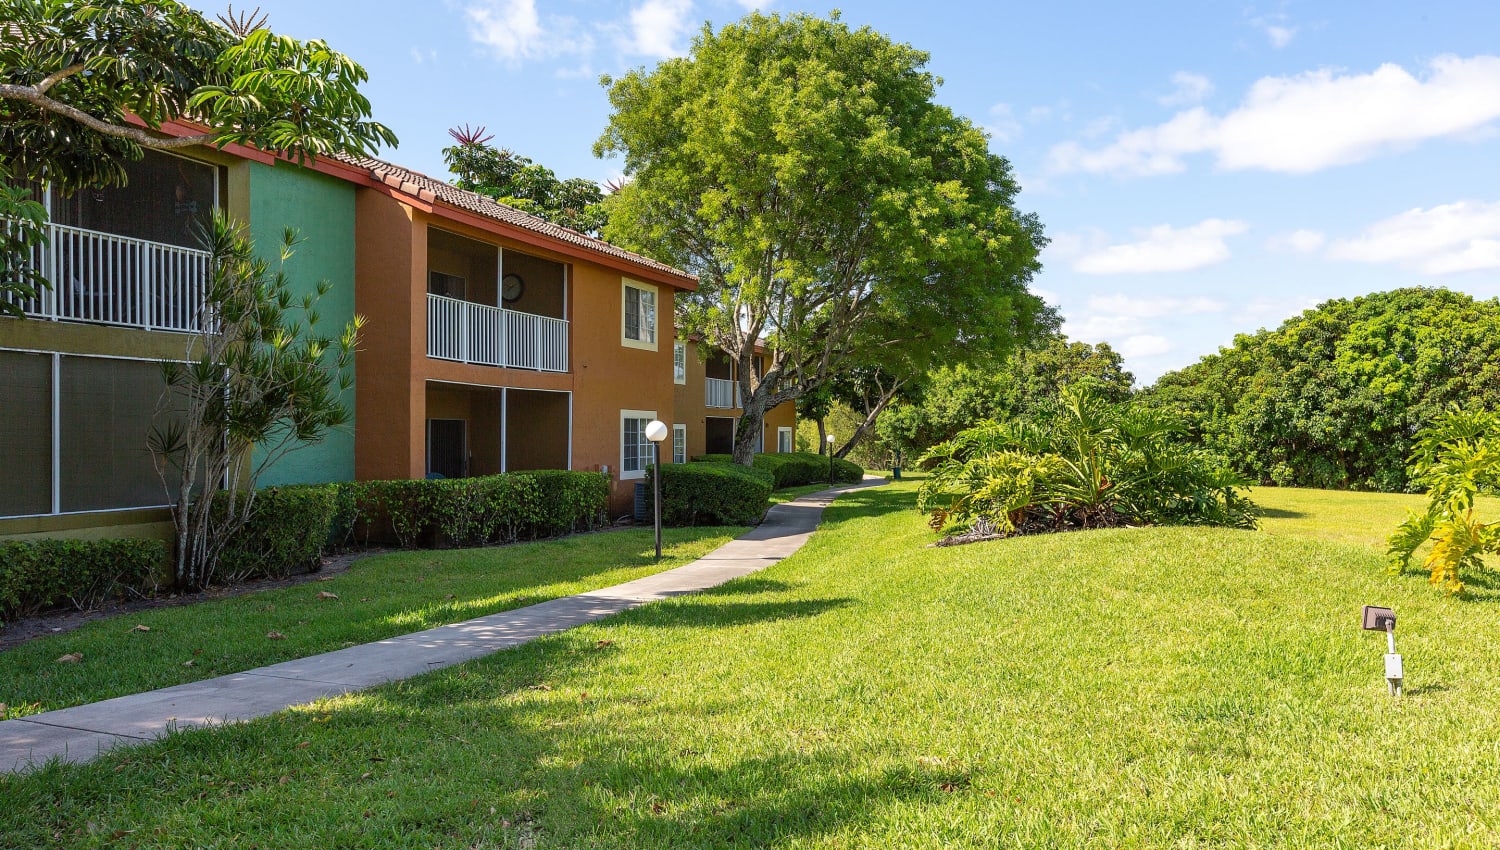 Exterior view of apartment buildings and lawn at Whalers Cove Apartments in Boynton Beach, Florida